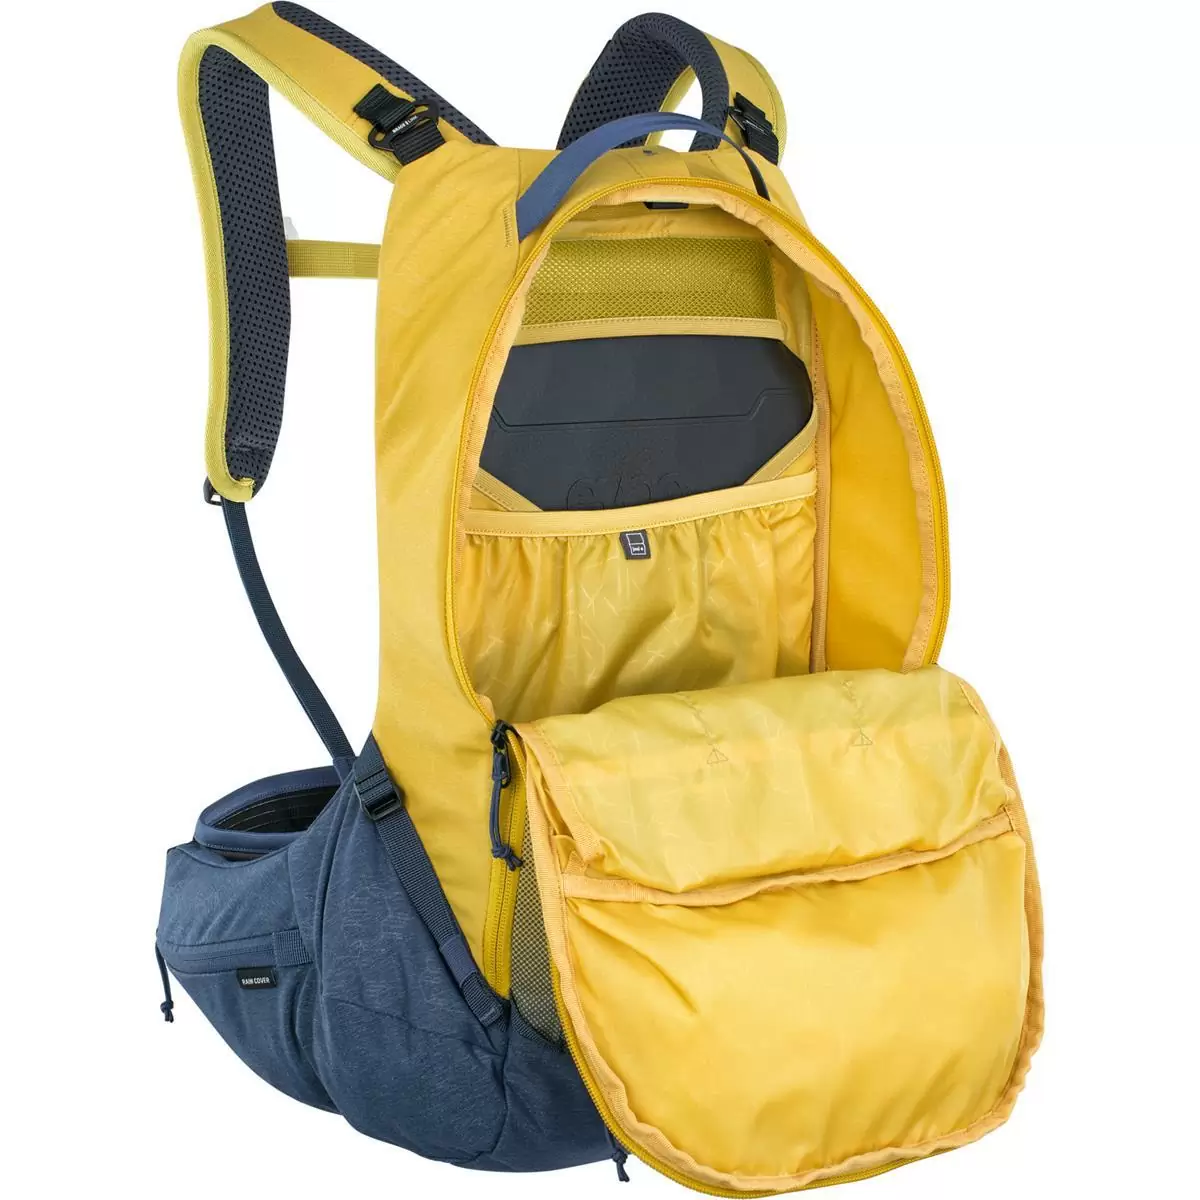 Trail Pro backpack 16 liters Curry – Denim with back protector size S/M #2